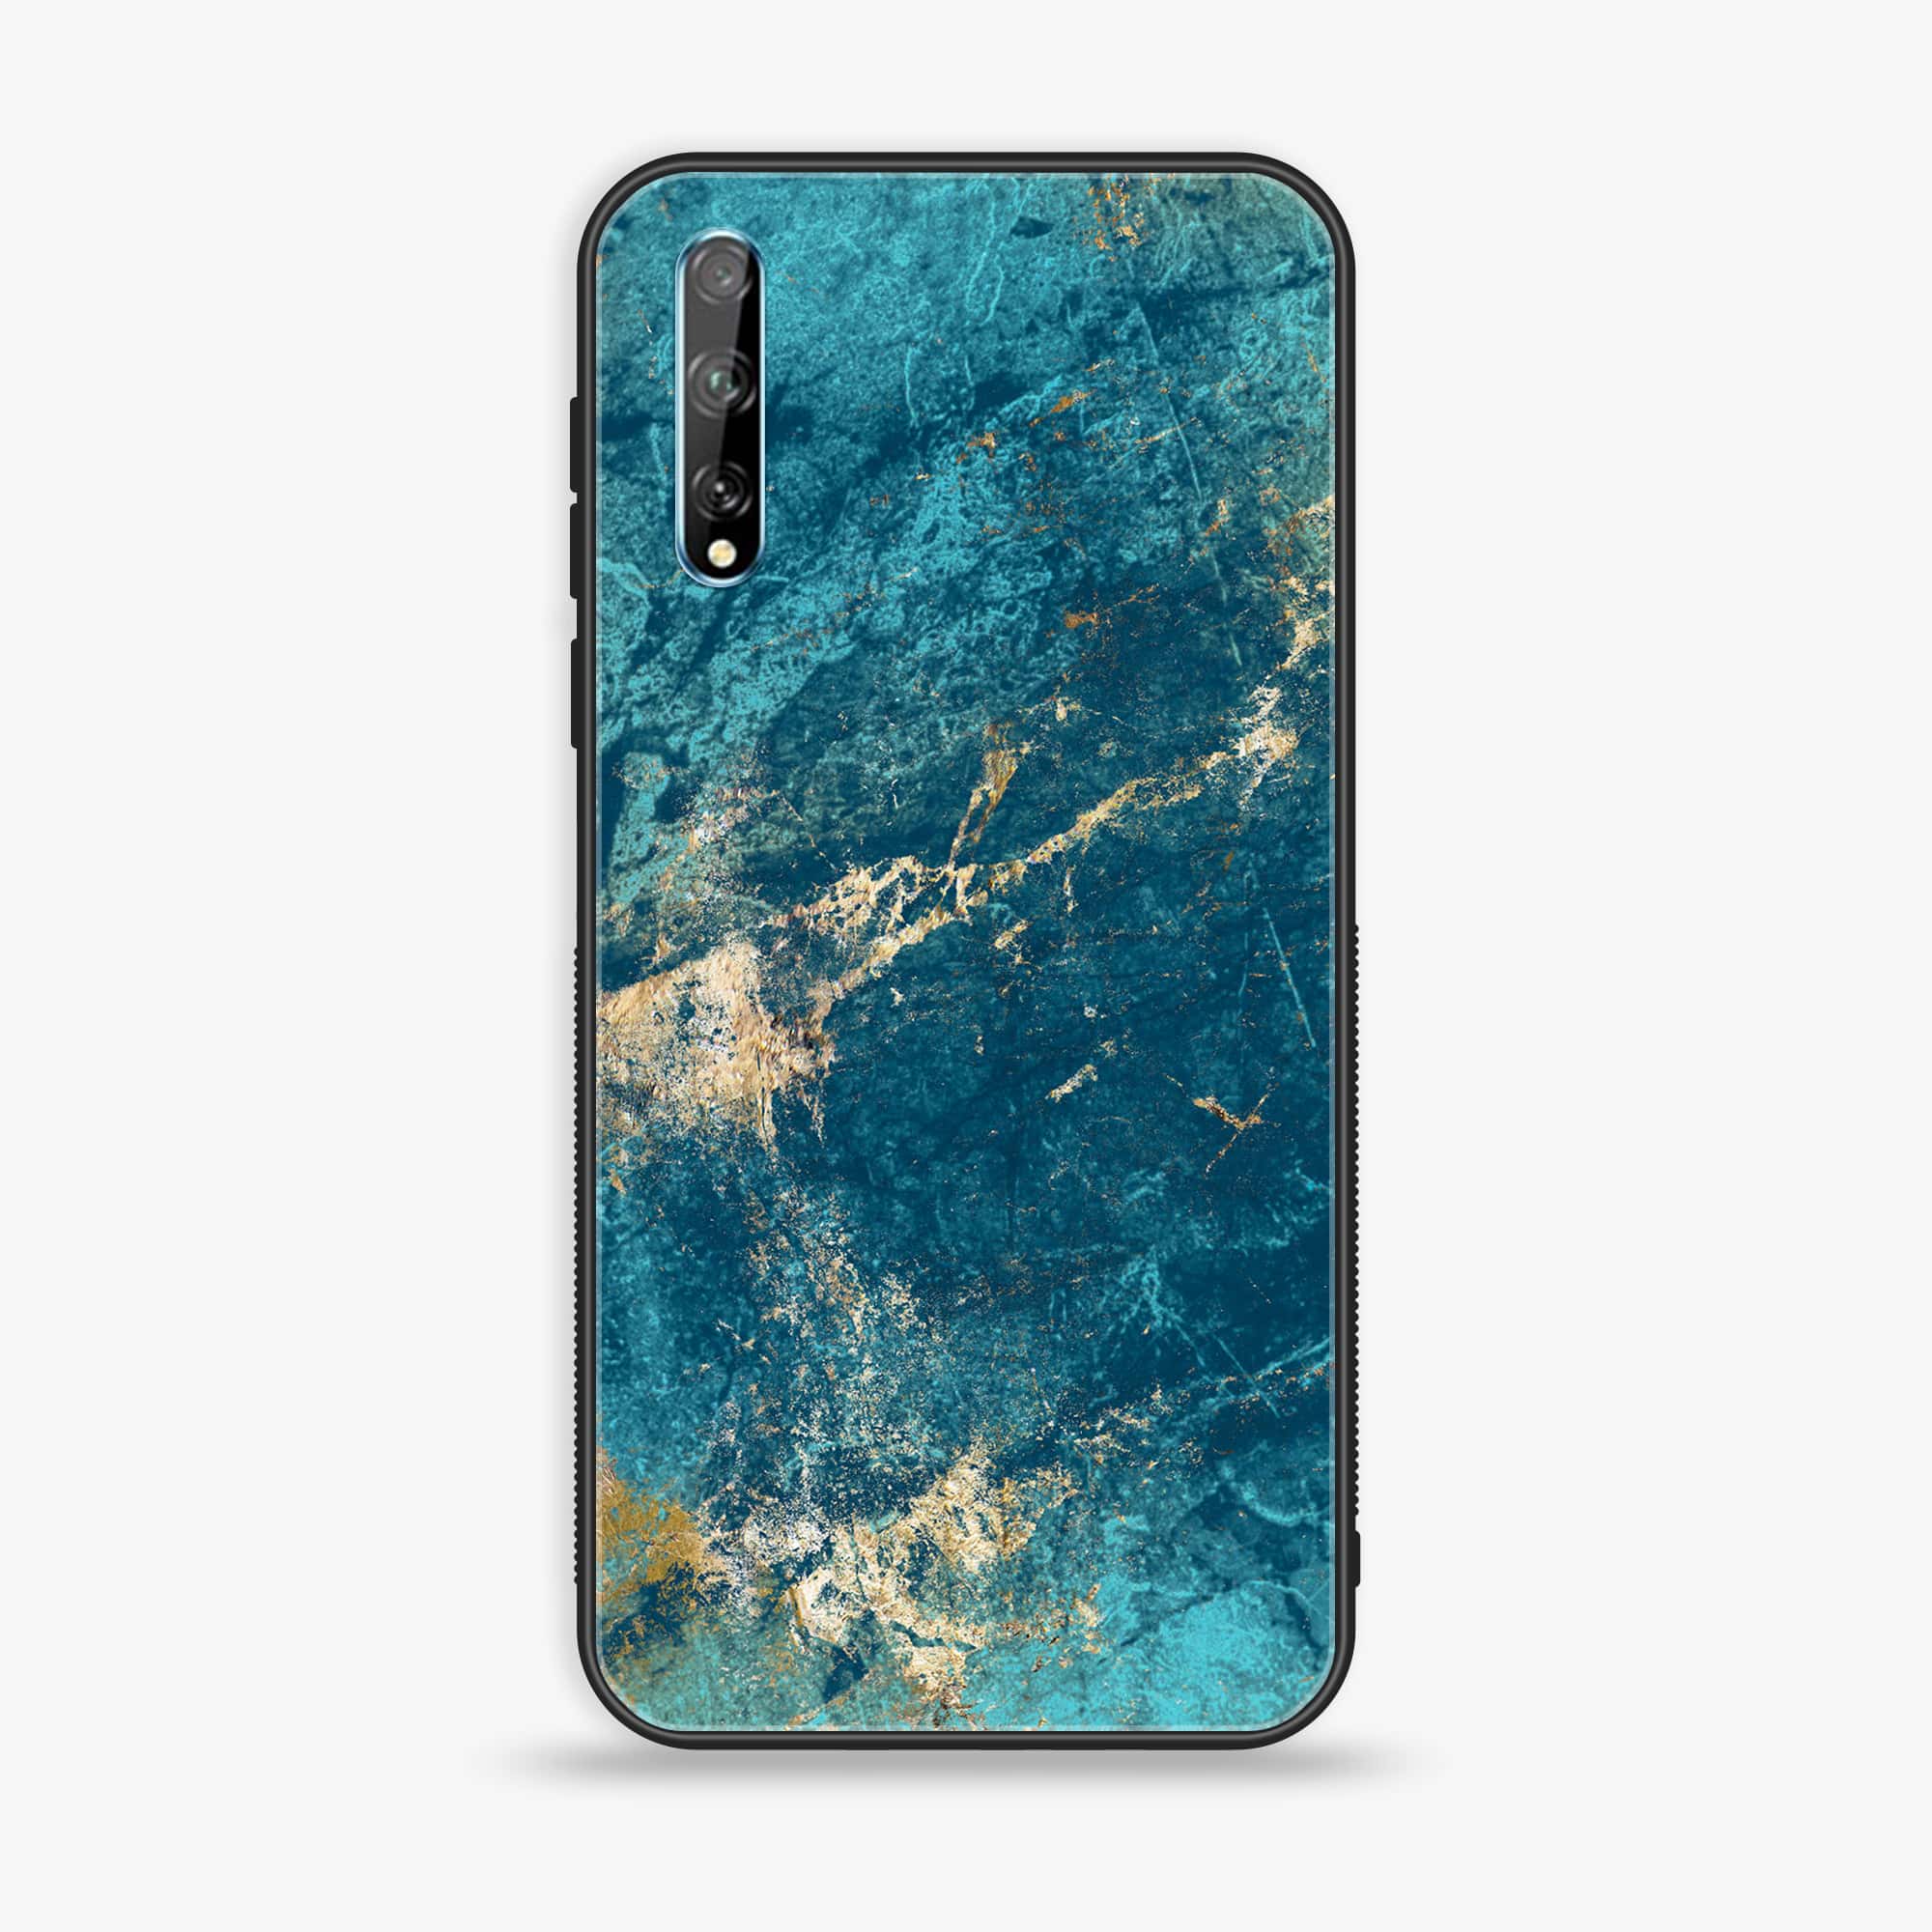 Huawei Y8p - Blue Marble Series V 2.0 - Premium Printed Glass soft Bumper shock Proof Case